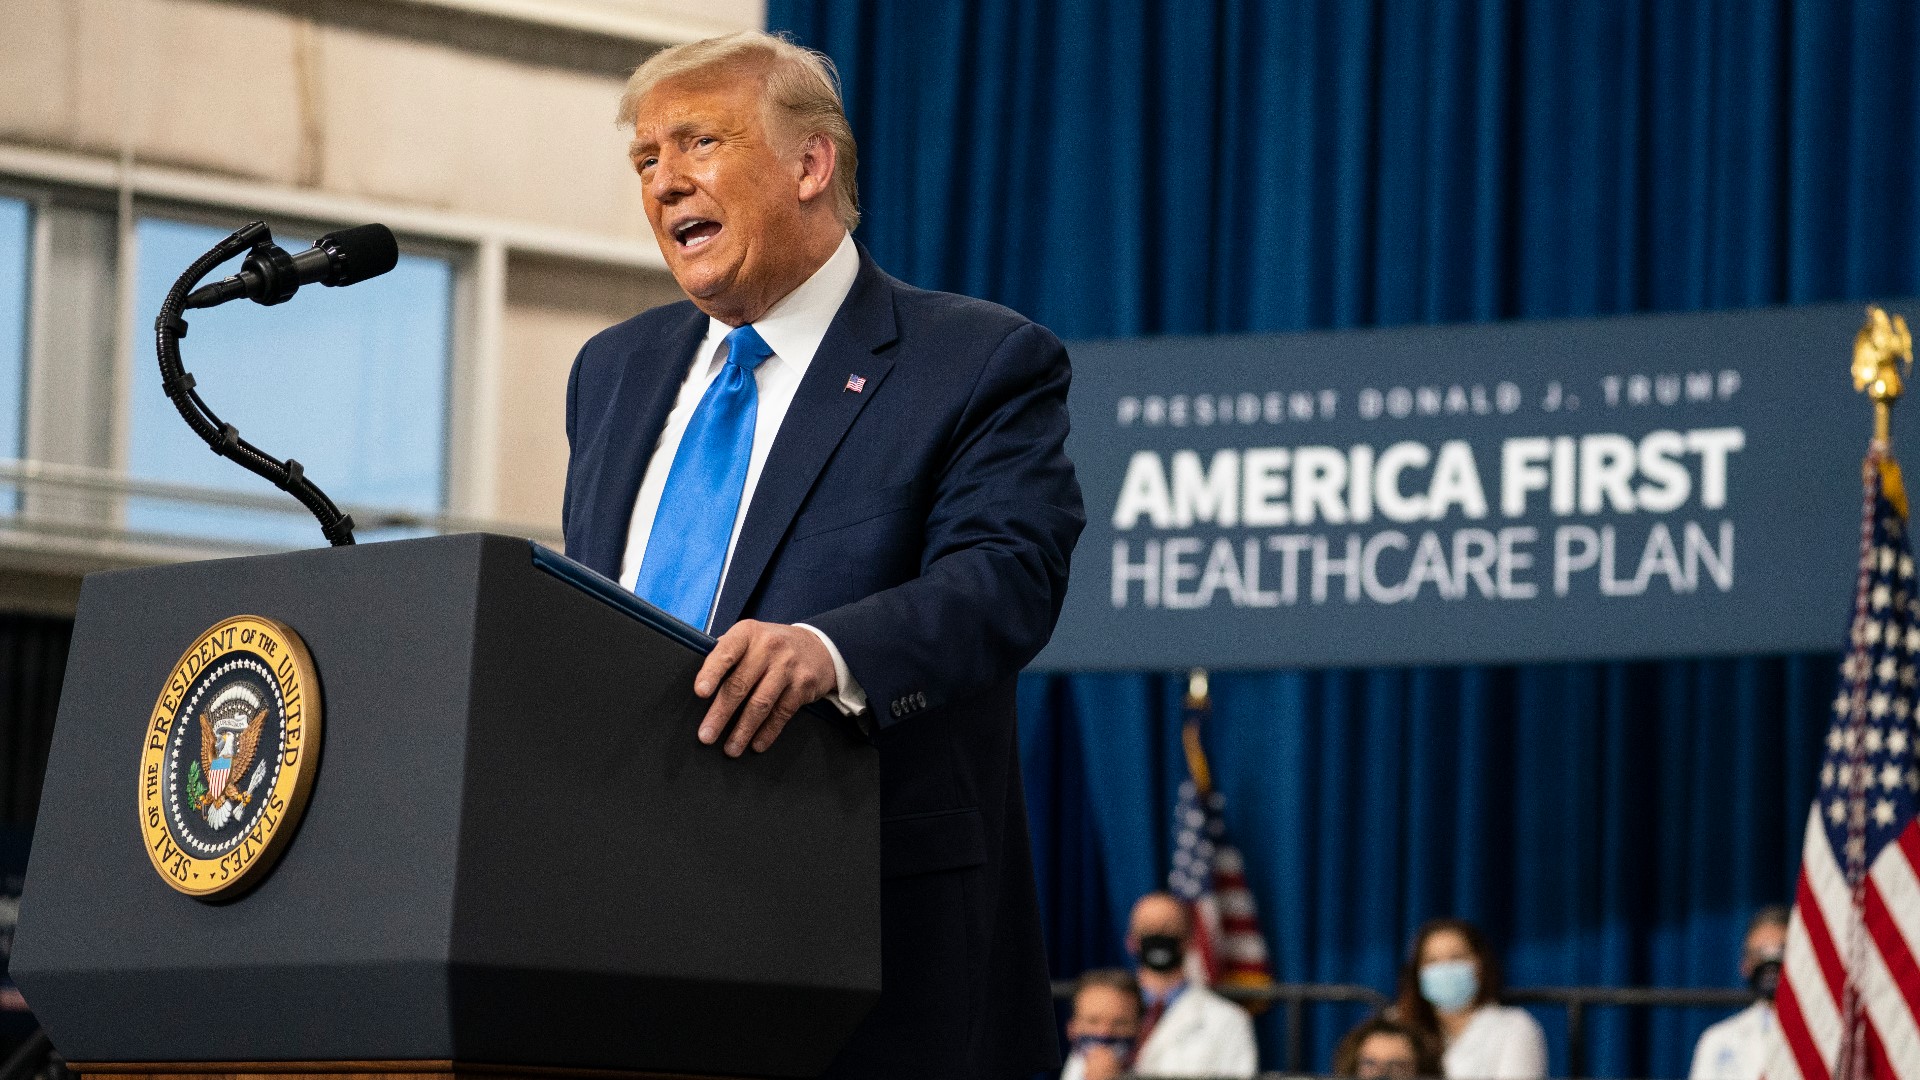 President Donald Trump signs two healthcare executive orders during a campaign event in Charlotte, North Carolina Thursday.